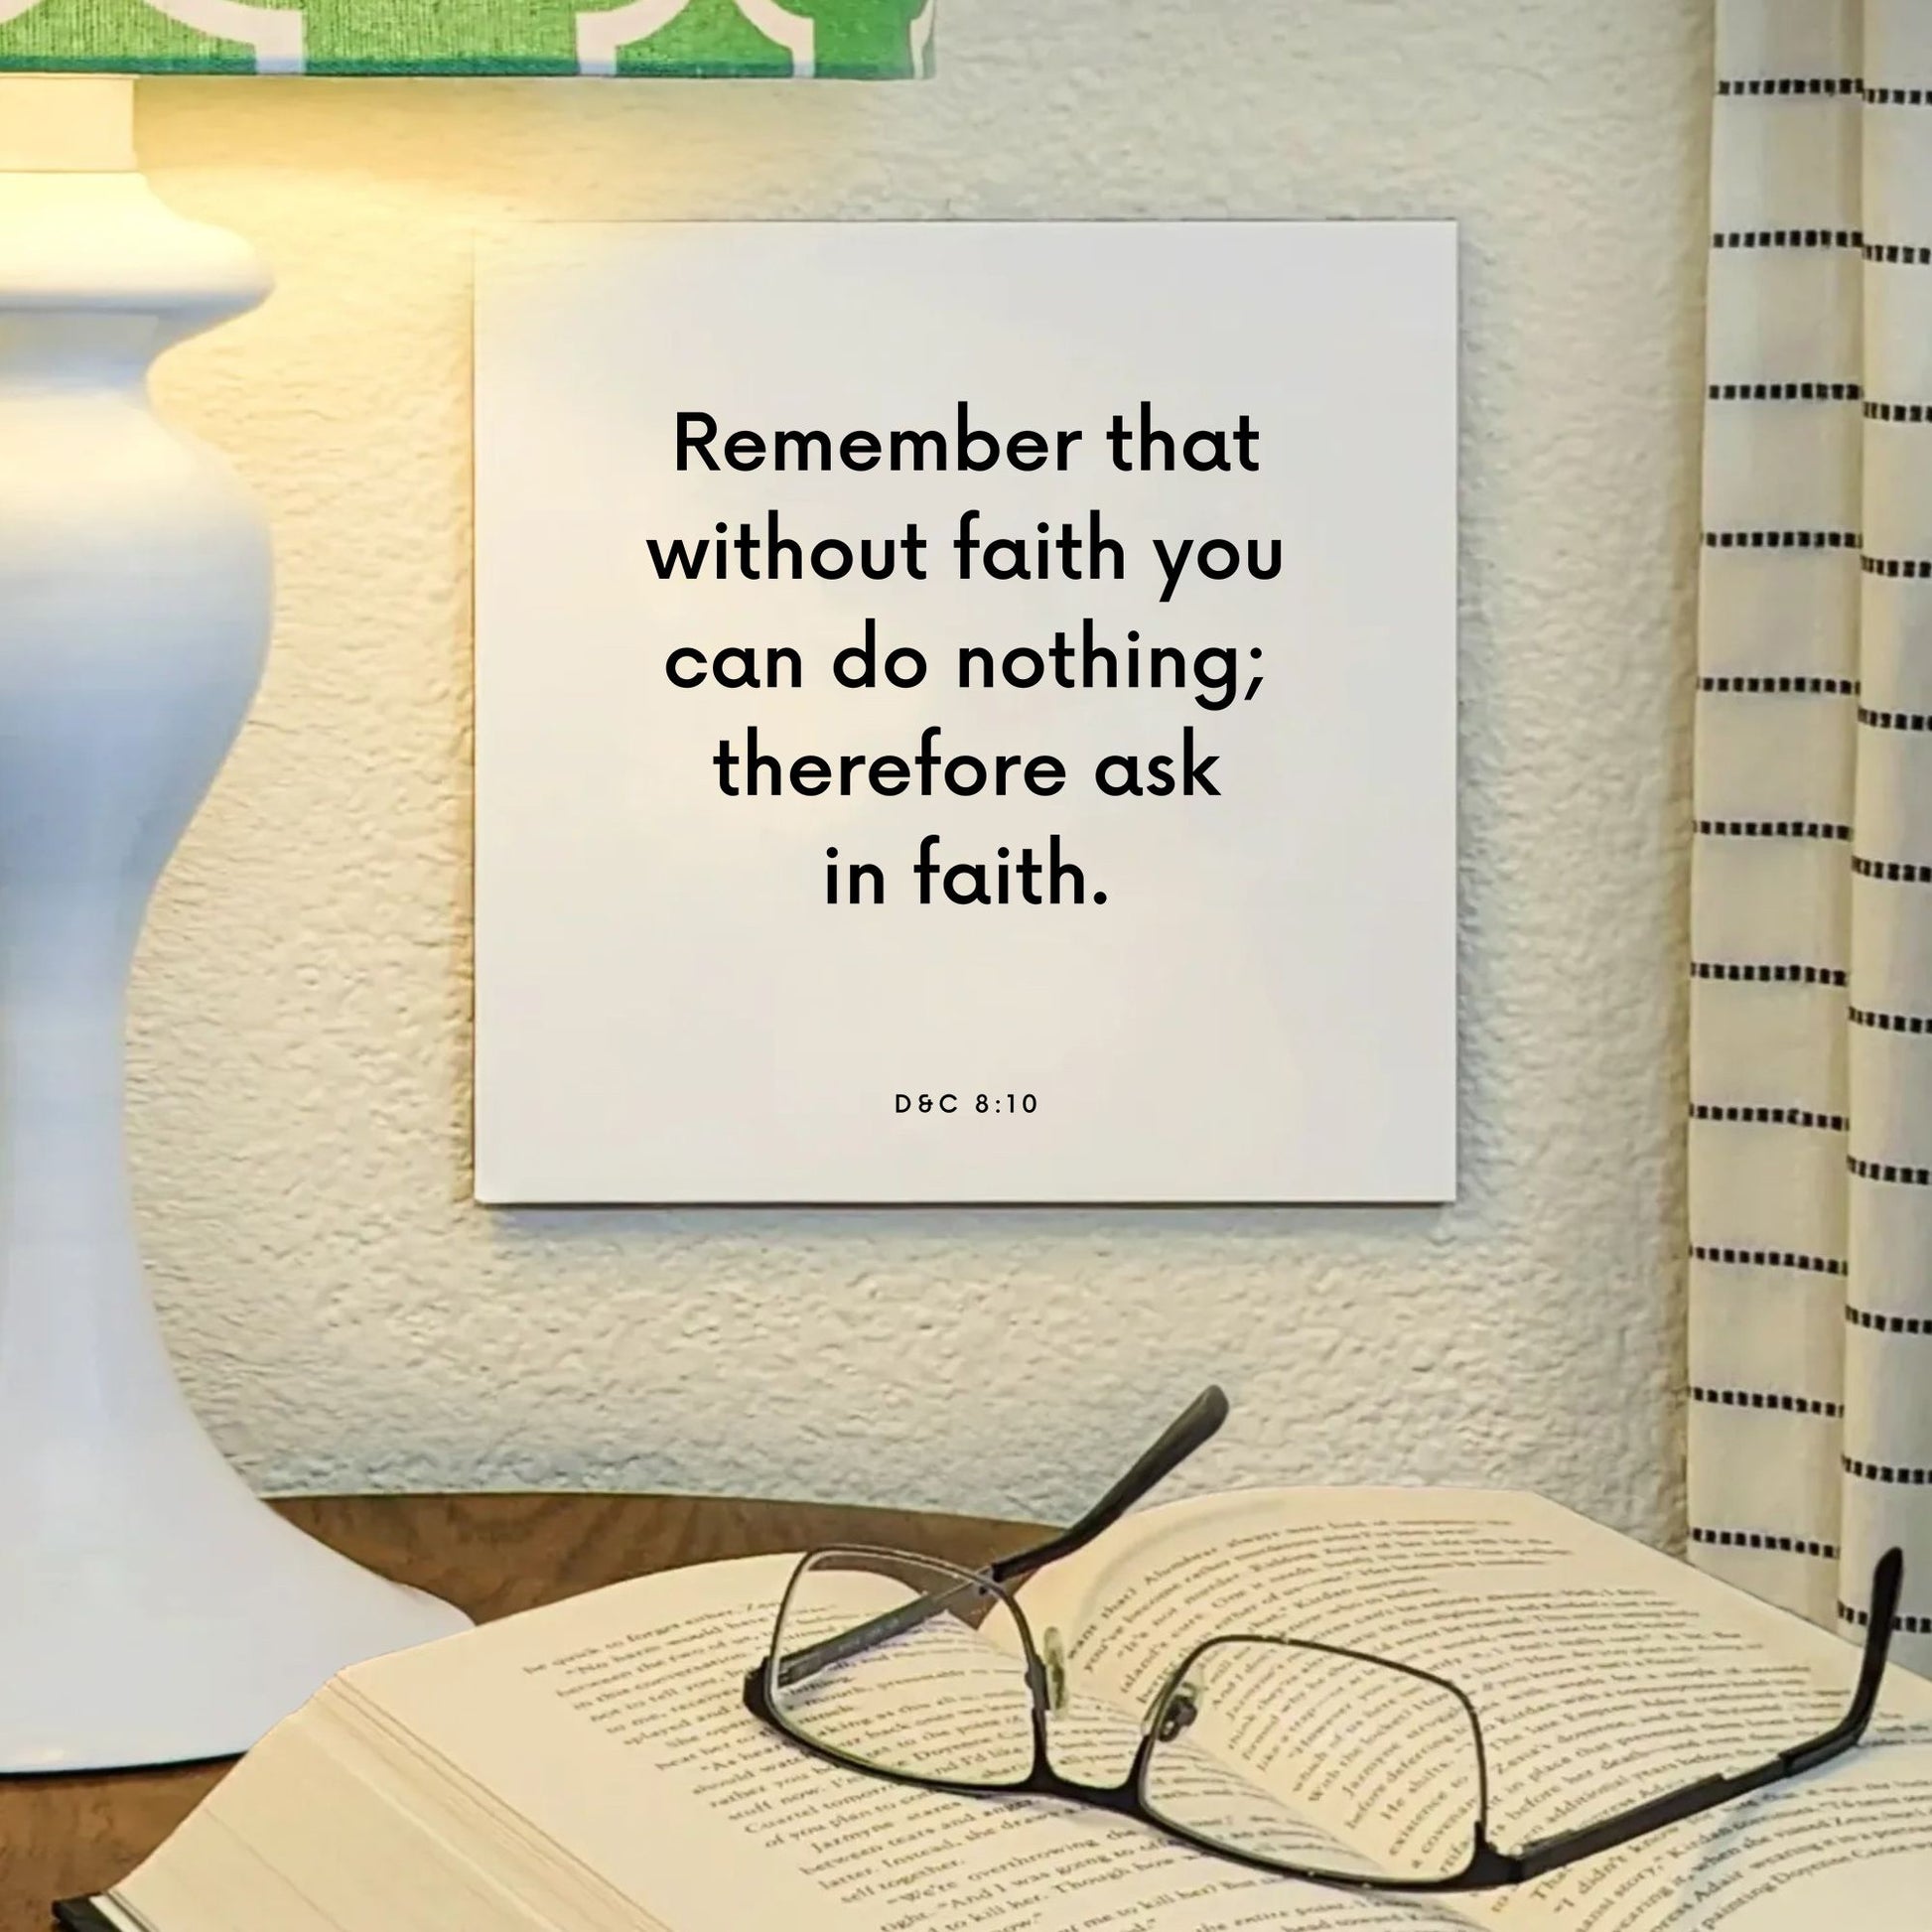 Lamp mouting of the scripture tile for D&C 8:10 - "Remember that without faith you can do nothing"